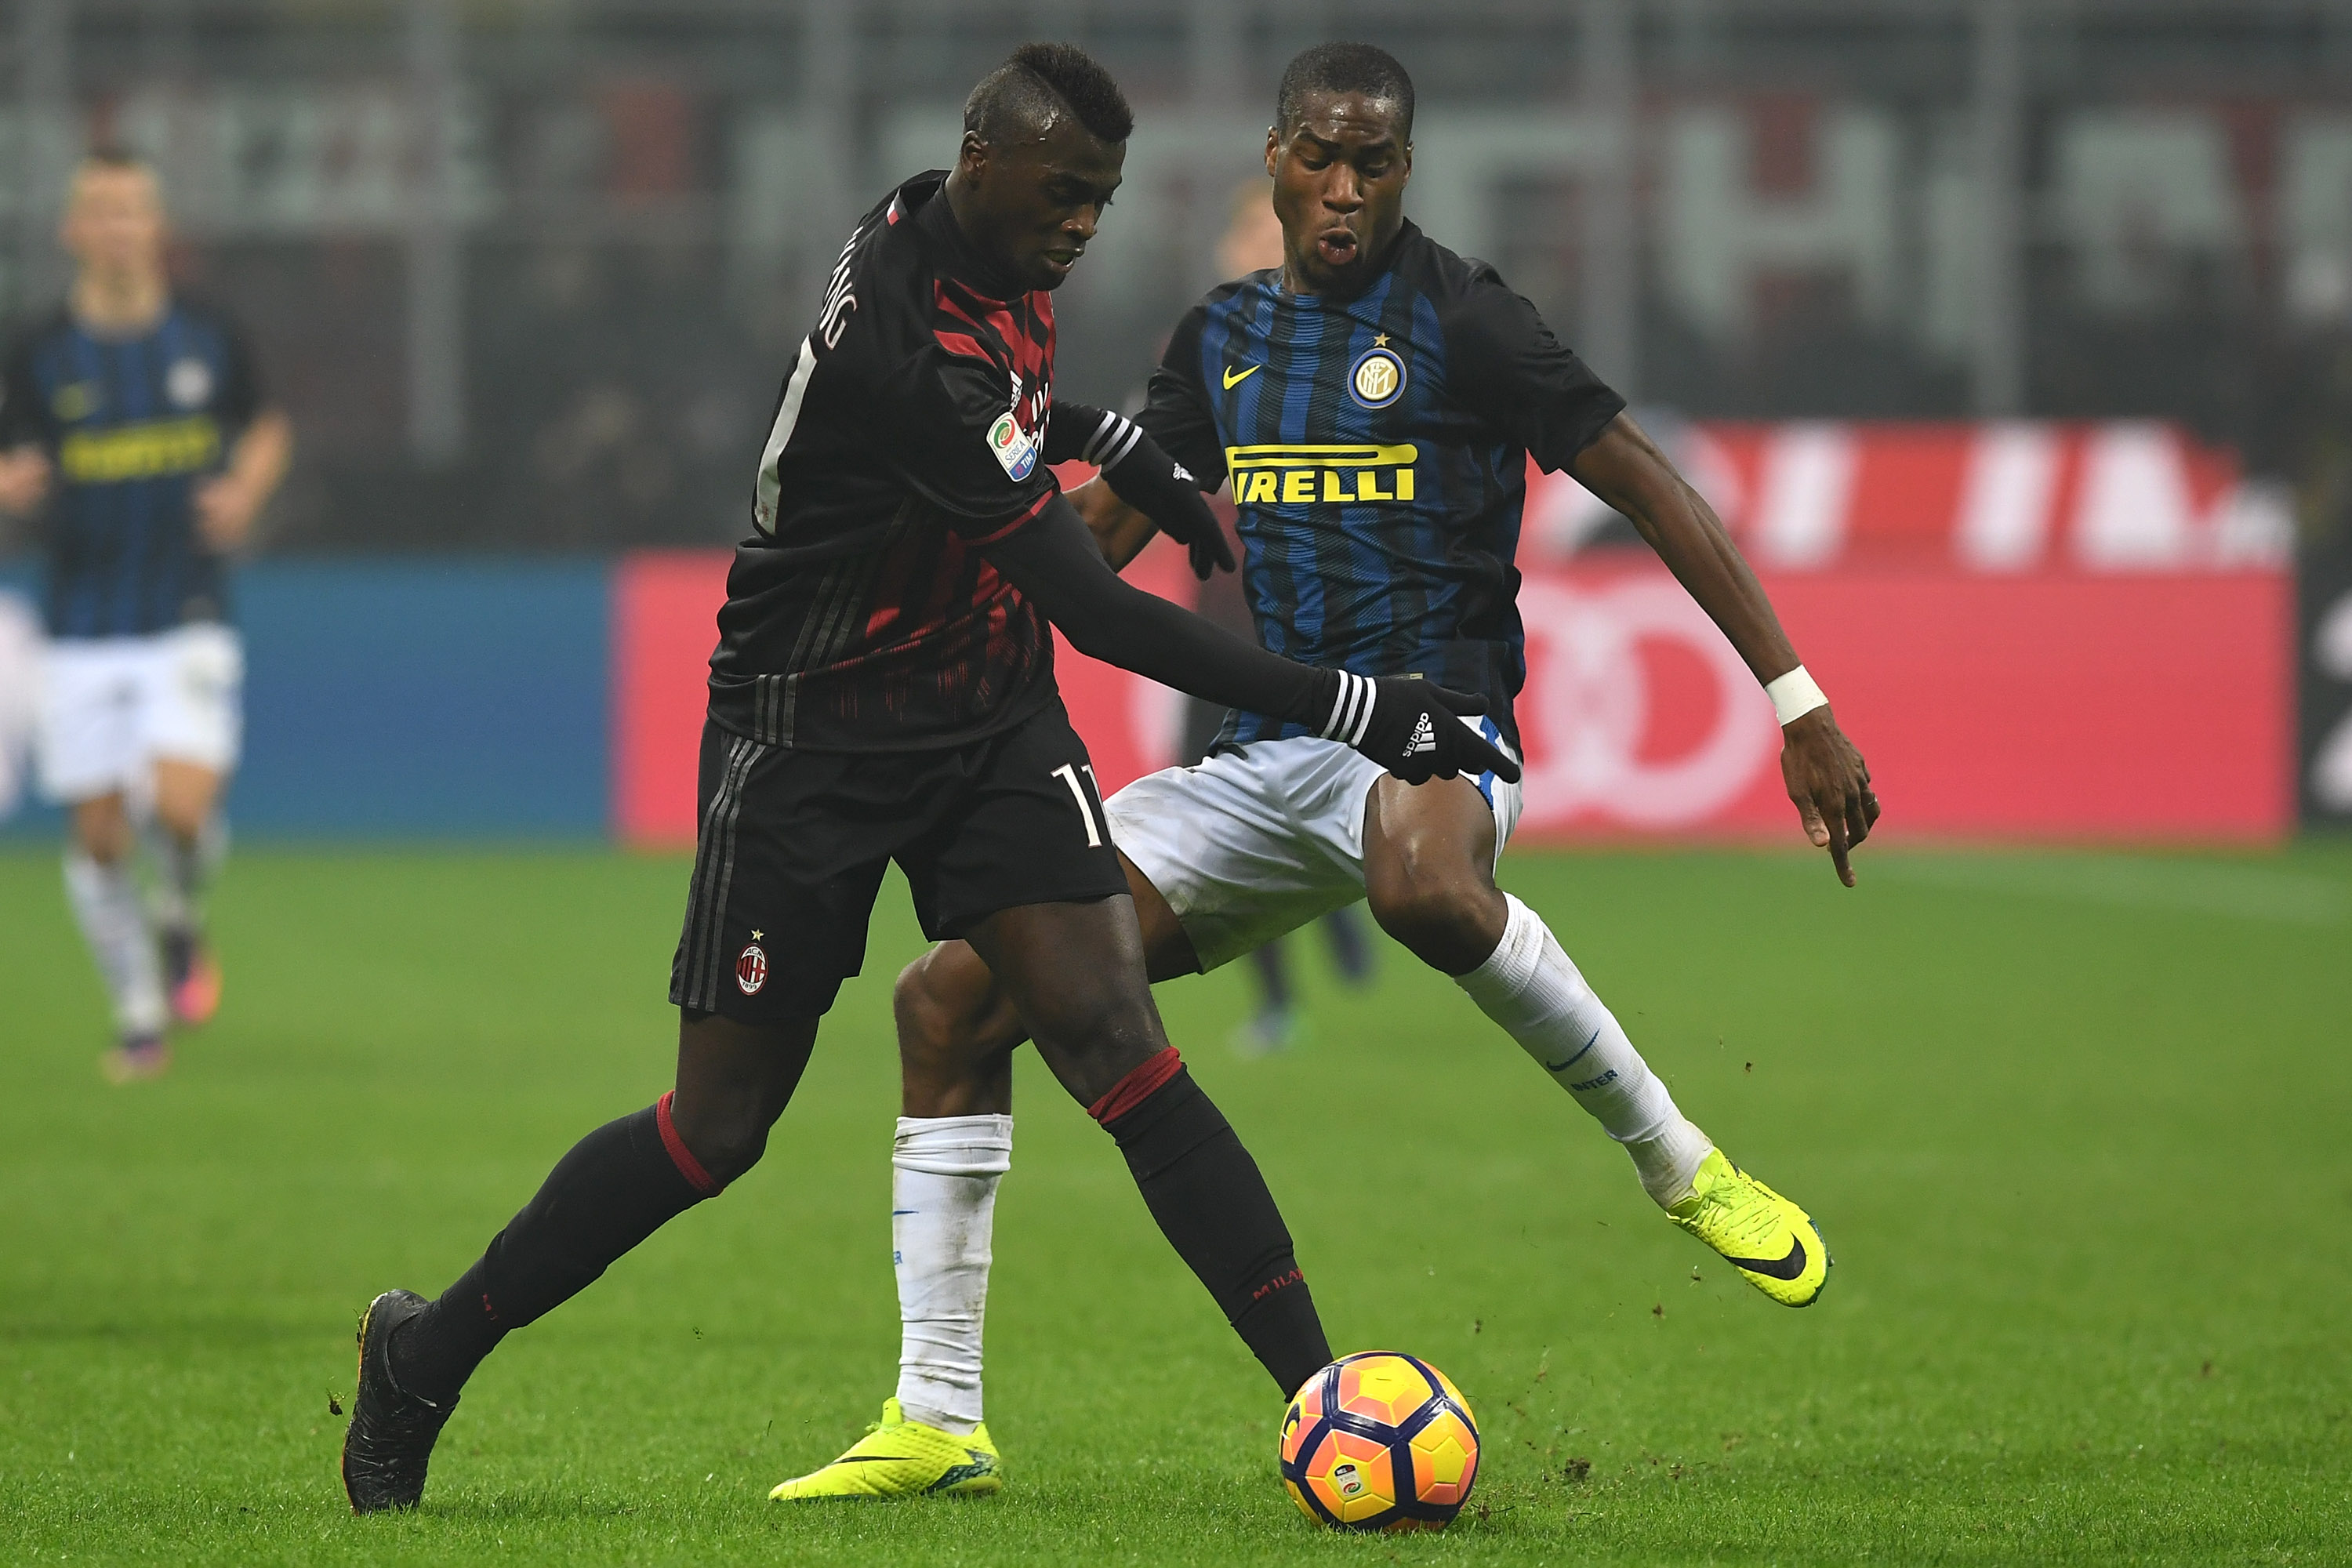 MILAN, ITALY - NOVEMBER 20:  Mbaye Niang (L) of AC Milan is challenged by Geoffrey Kondogbia of FC Internazionale during the Serie A match between AC Milan and FC Internazionale at Stadio Giuseppe Meazza on November 20, 2016 in Milan, Italy.  (Photo by Valerio Pennicino/Getty Images)